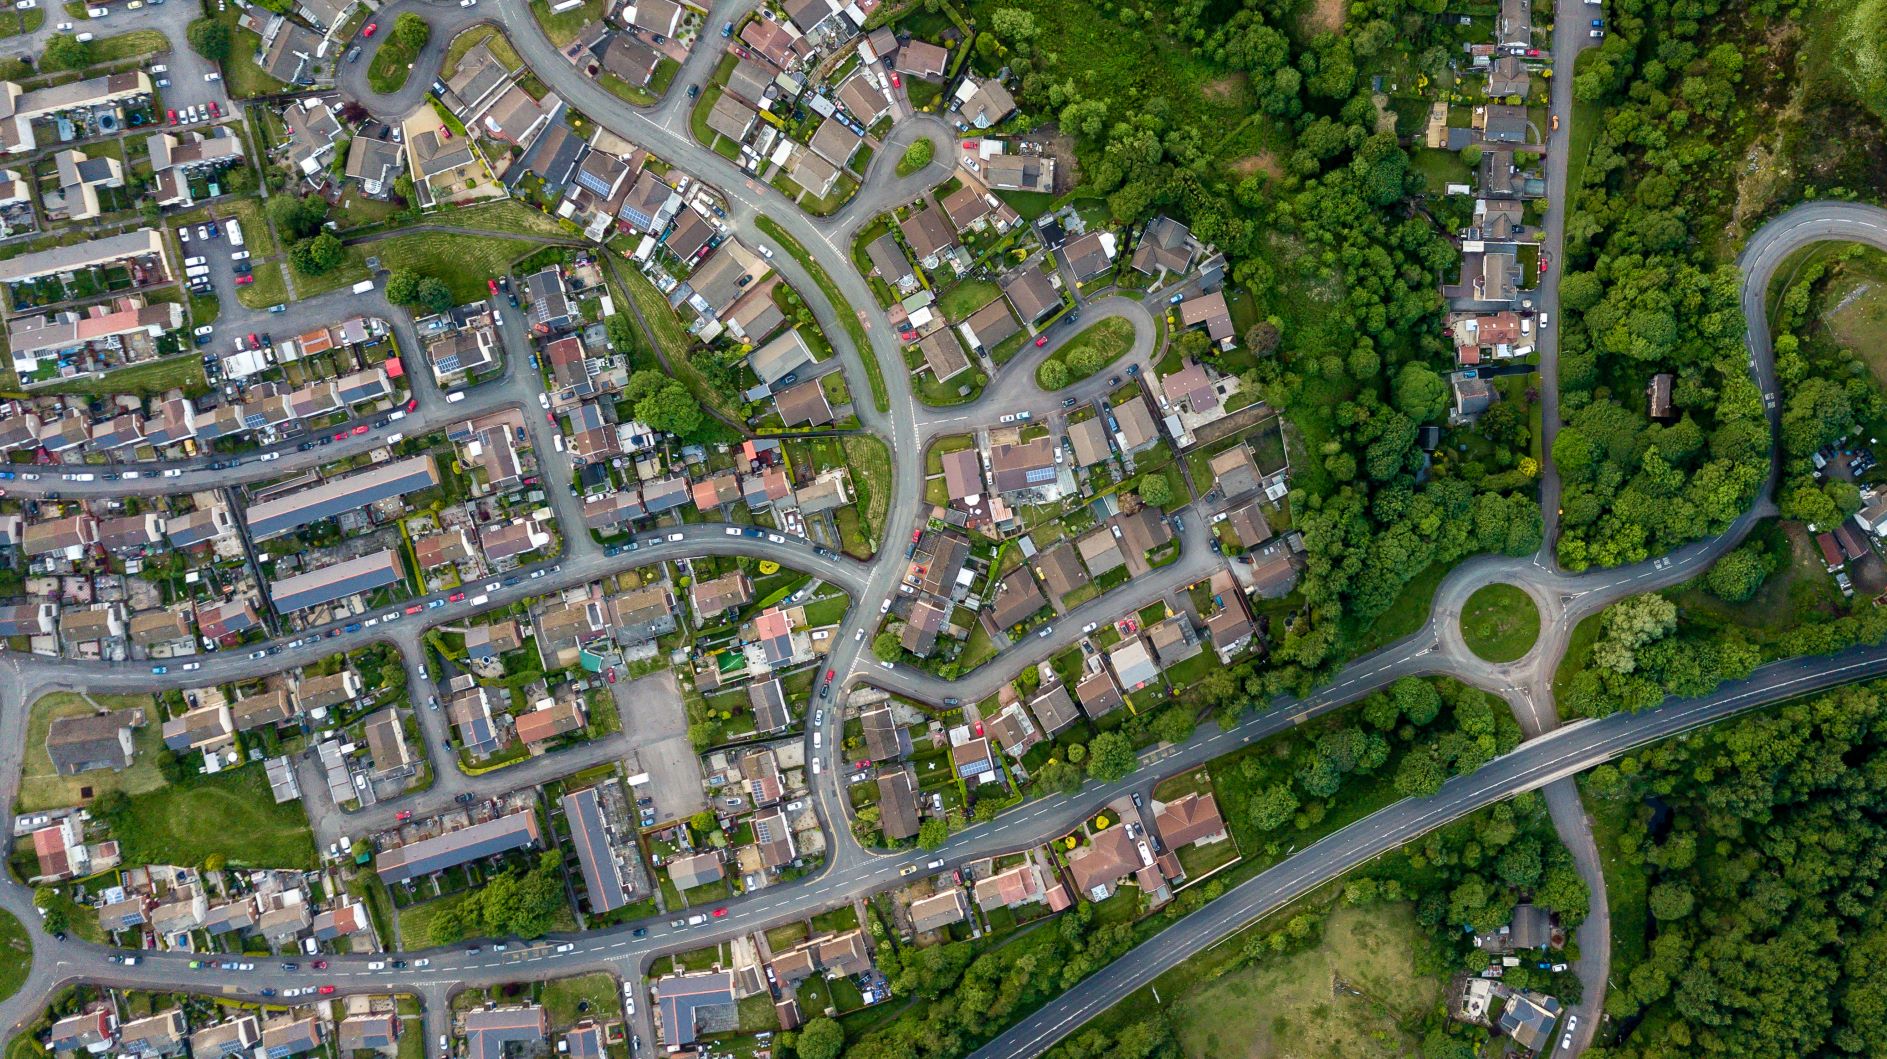 Scottish property industry 'must do more' to improve perception among communities